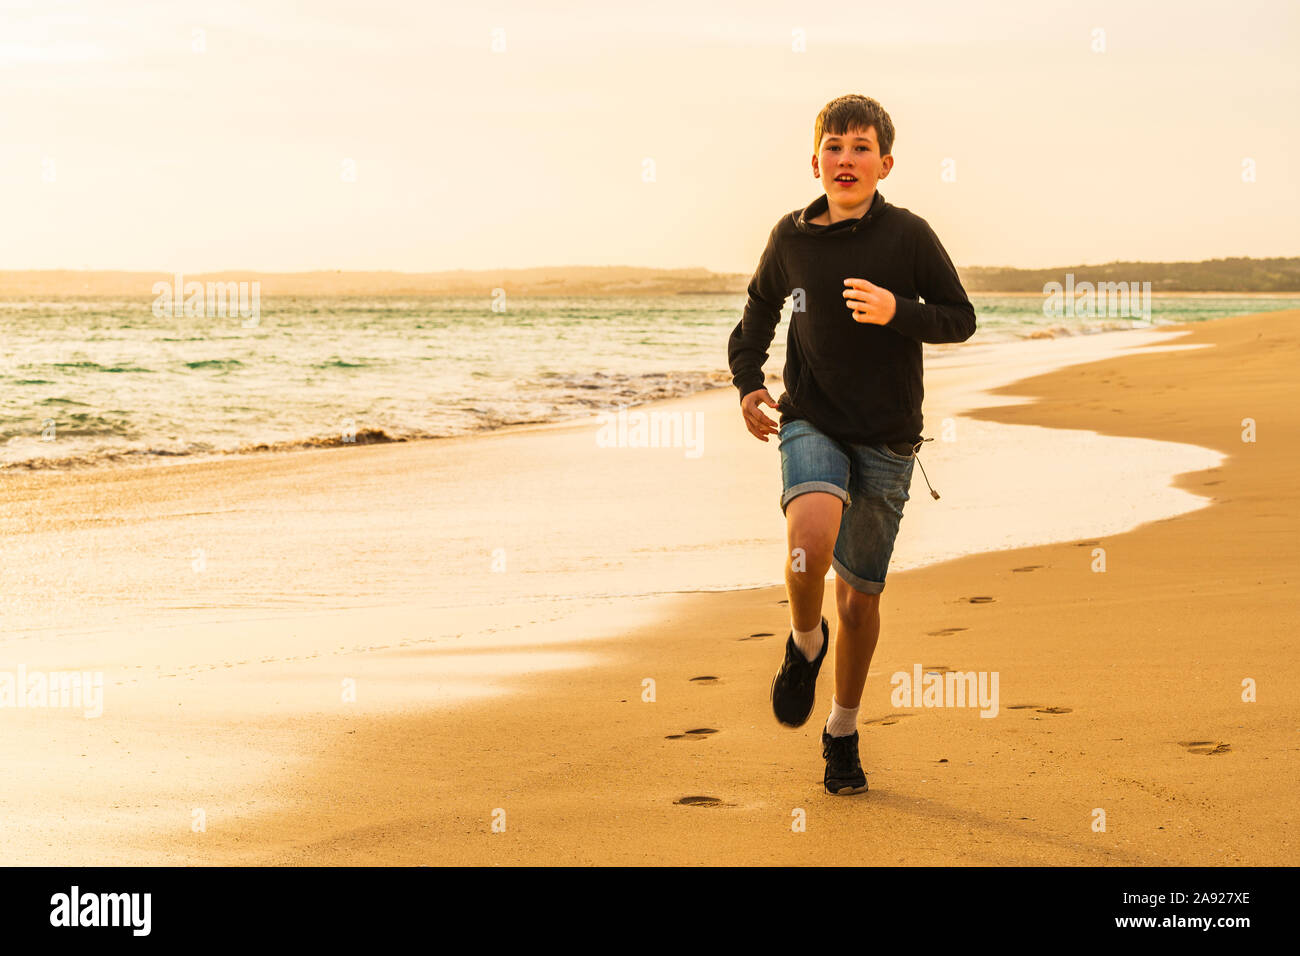 Boy running on beach at sunset Banque D'Images